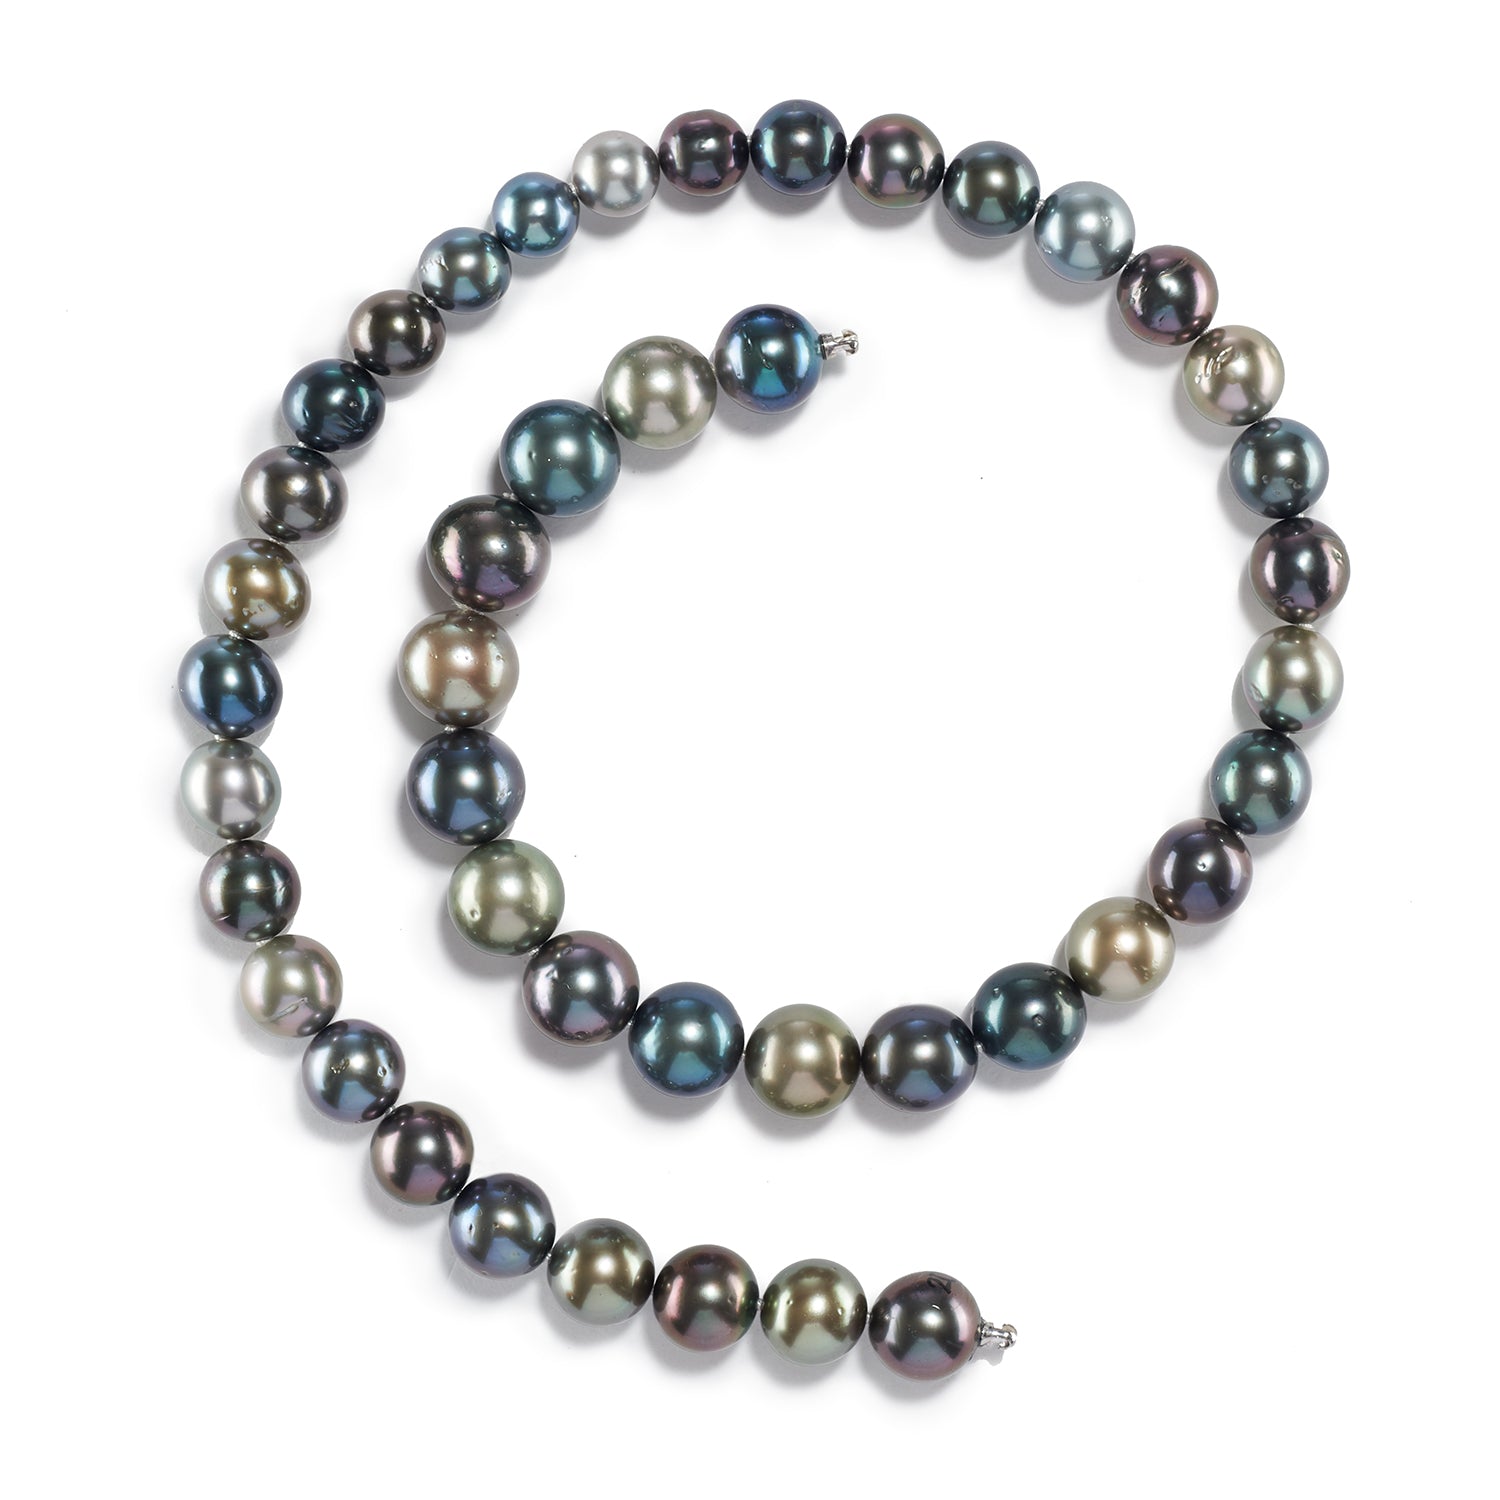 Varied Tahitian Pearl Necklace Strand